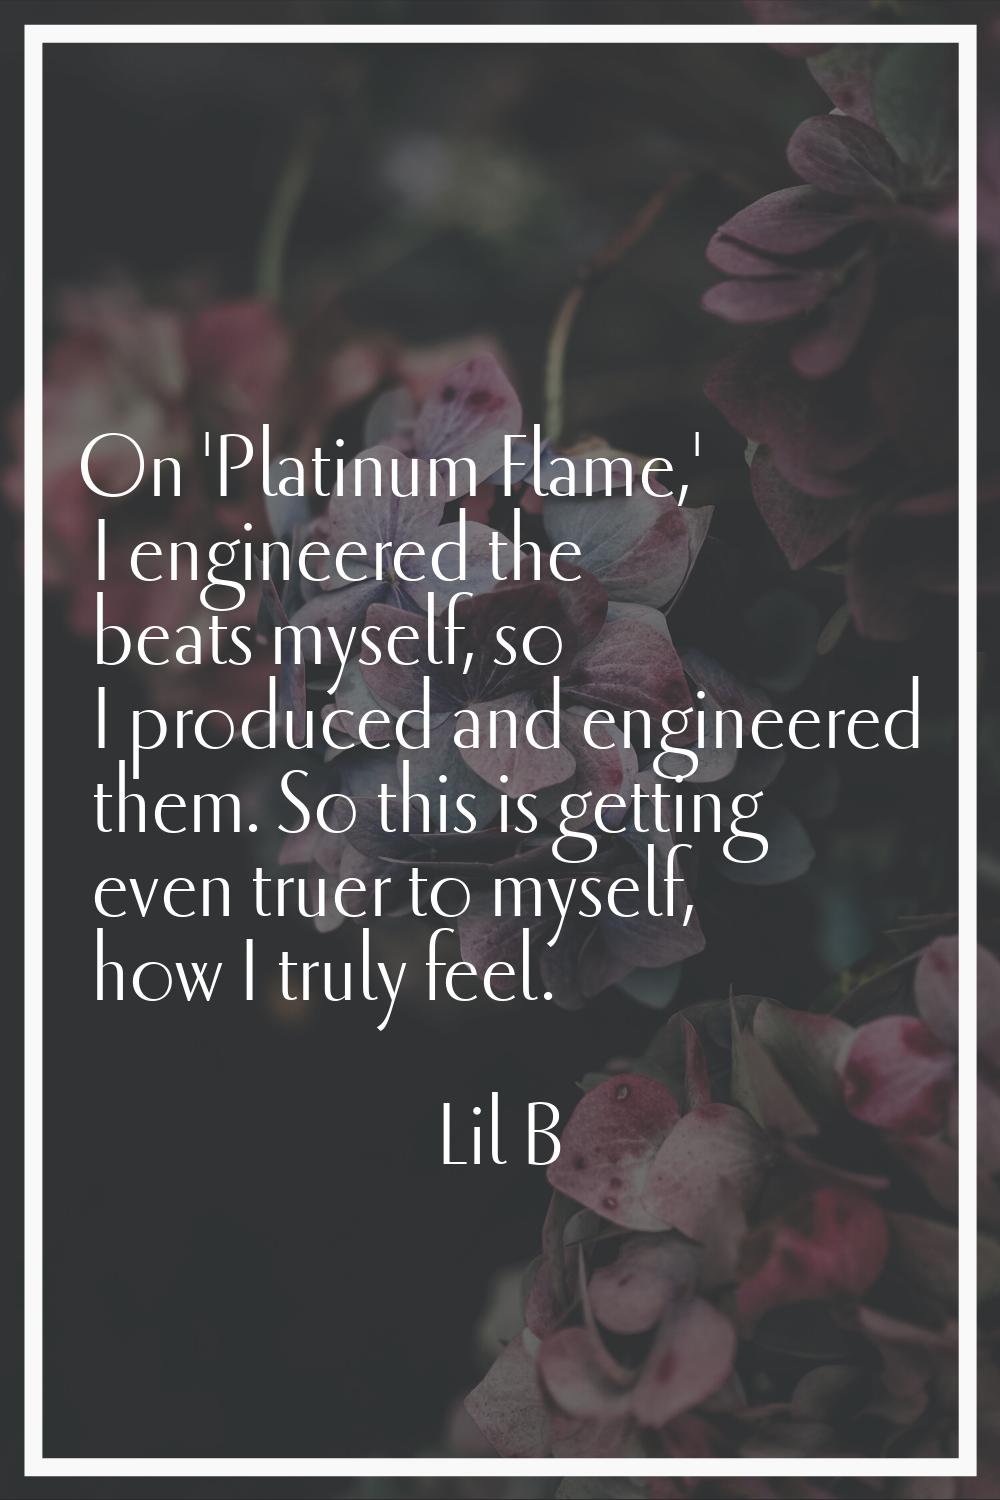 On 'Platinum Flame,' I engineered the beats myself, so I produced and engineered them. So this is g